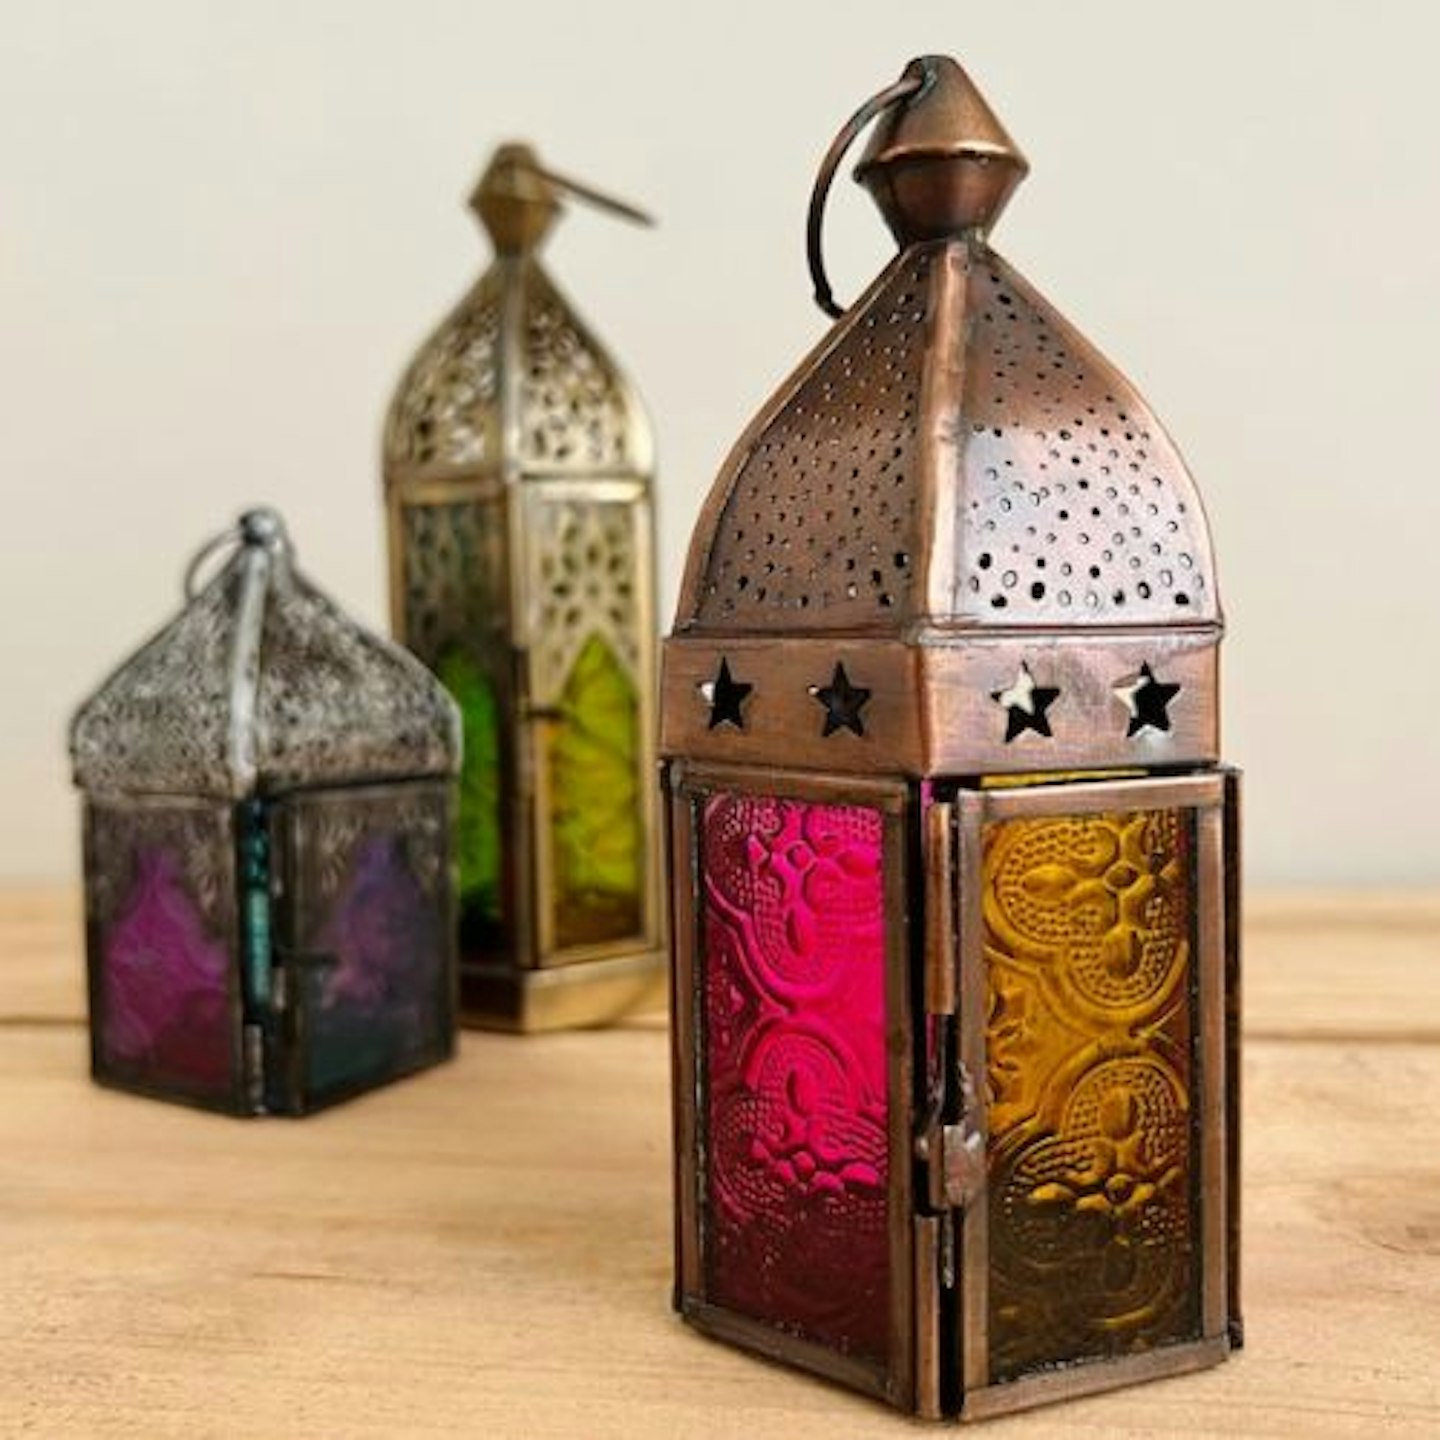 Handmade Recycled Copper Coloured Metal and Glass Lanterns